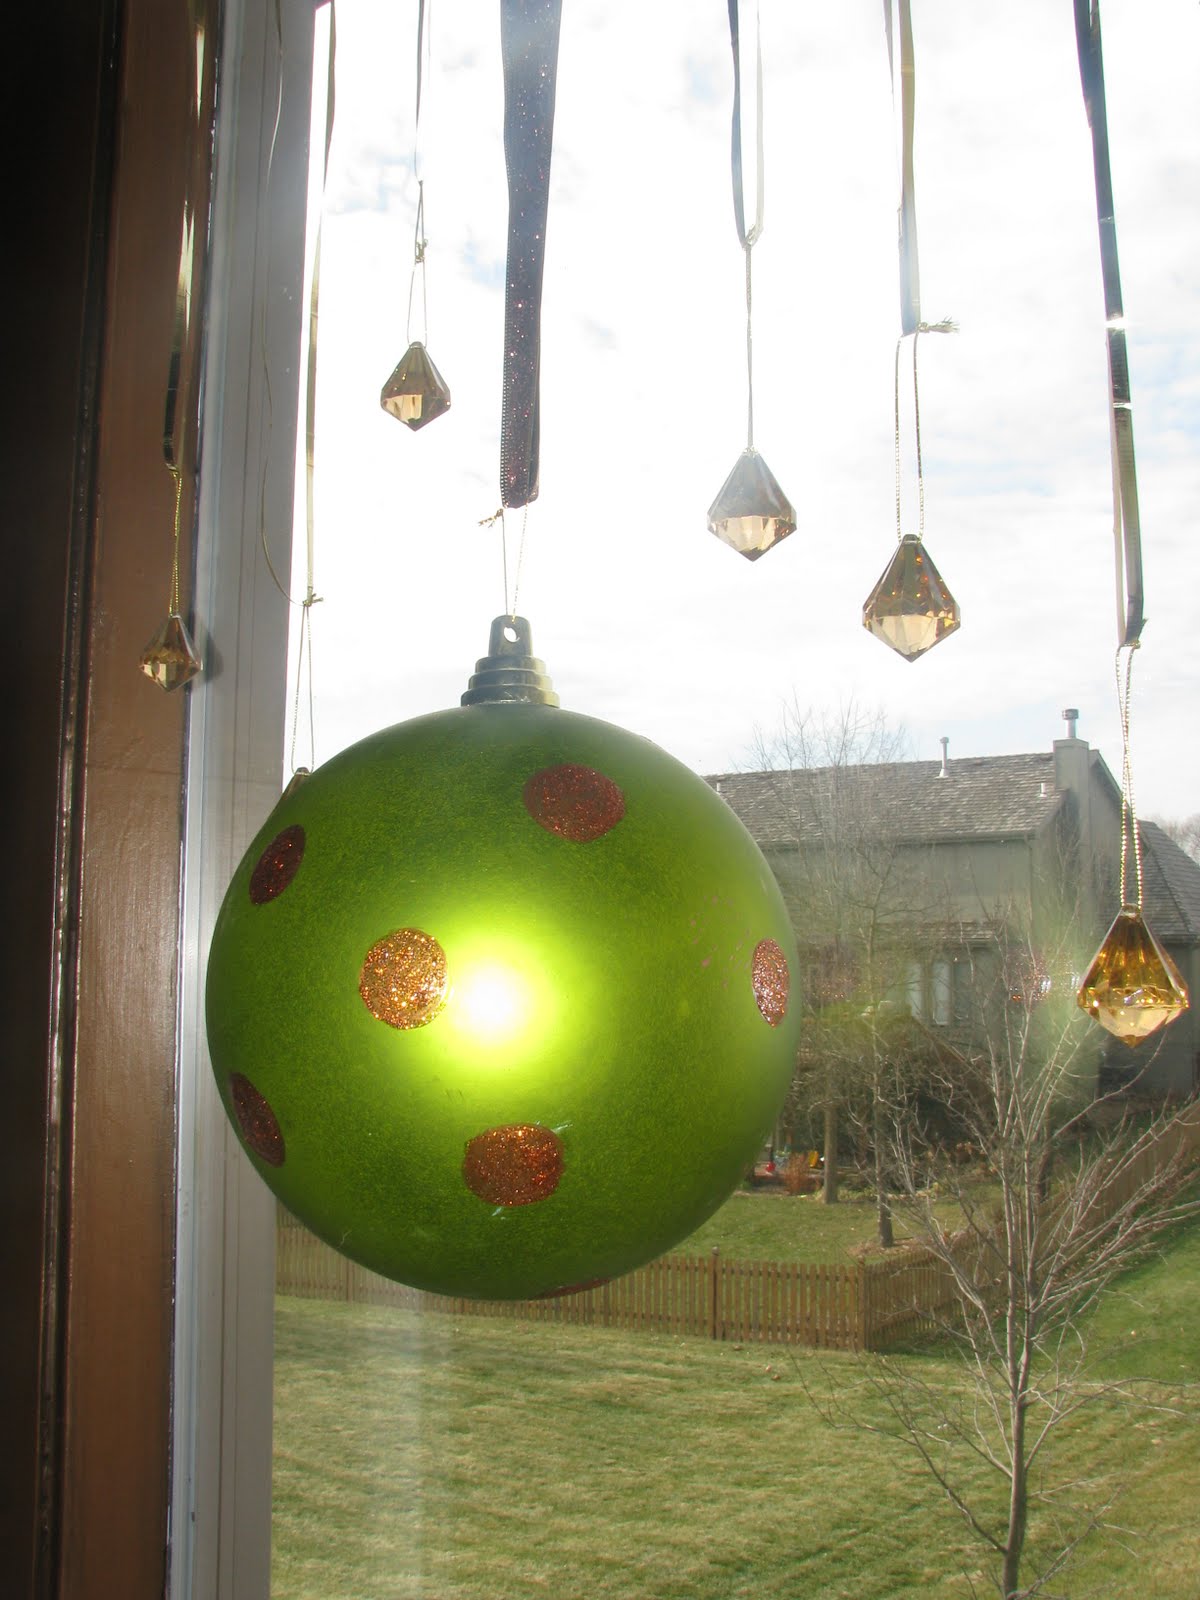 Glittering your own Christmas balls….is too much work